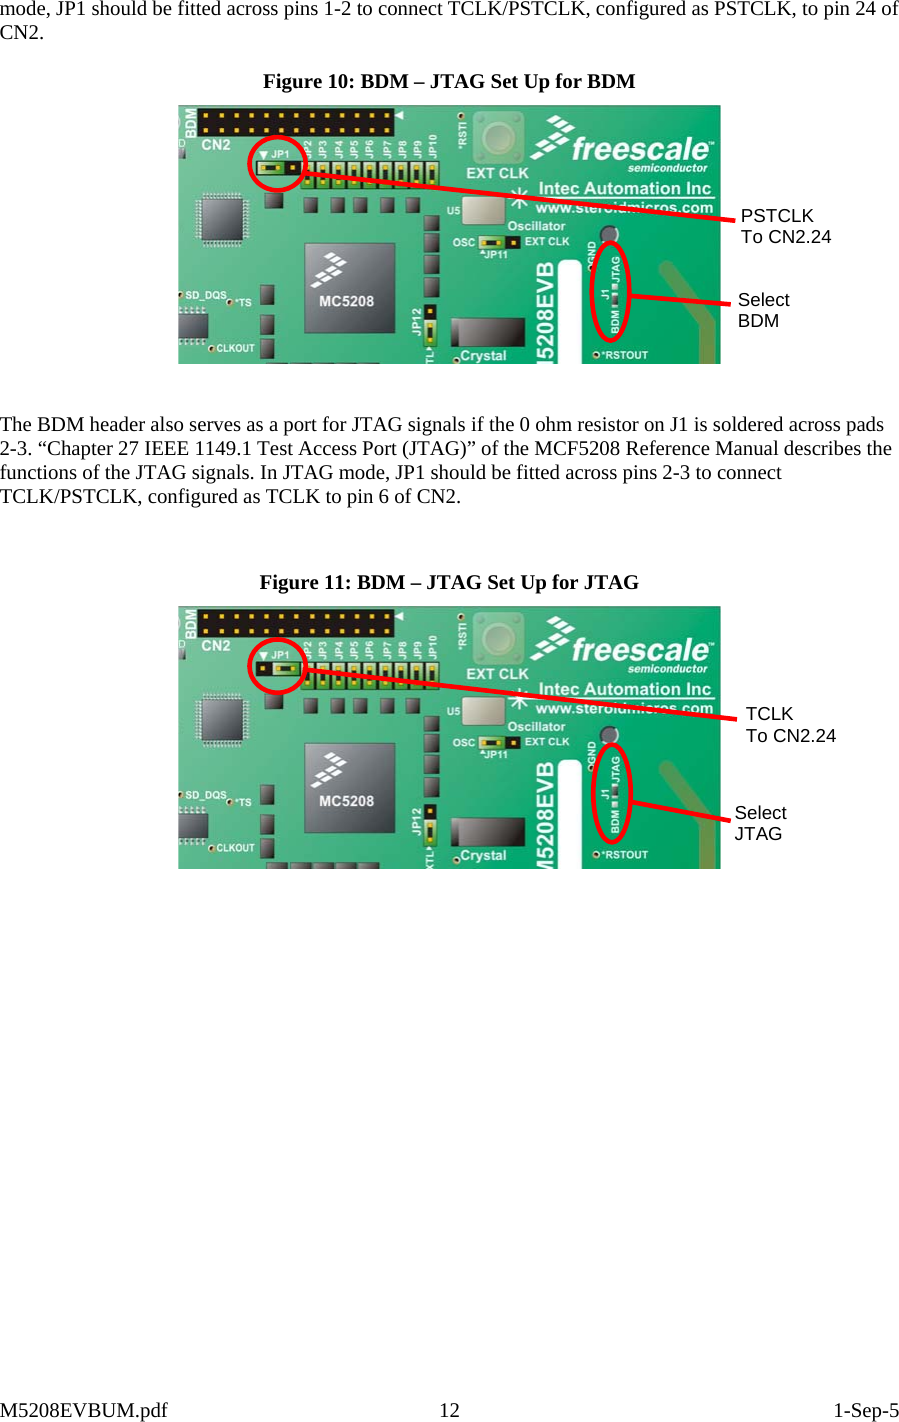  mode, JP1 should be fitted across pins 1-2 to connect TCLK/PSTCLK, configured as PSTCLK, to pin 24 of CN2.  Figure 10: BDM – JTAG Set Up for BDM  Select BDM PSTCLK To CN2.24  The BDM header also serves as a port for JTAG signals if the 0 ohm resistor on J1 is soldered across pads 2-3. “Chapter 27 IEEE 1149.1 Test Access Port (JTAG)” of the MCF5208 Reference Manual describes the functions of the JTAG signals. In JTAG mode, JP1 should be fitted across pins 2-3 to connect TCLK/PSTCLK, configured as TCLK to pin 6 of CN2.   Figure 11: BDM – JTAG Set Up for JTAG  Select JTAG TCLK To CN2.24 M5208EVBUM.pdf 12  1-Sep-5 